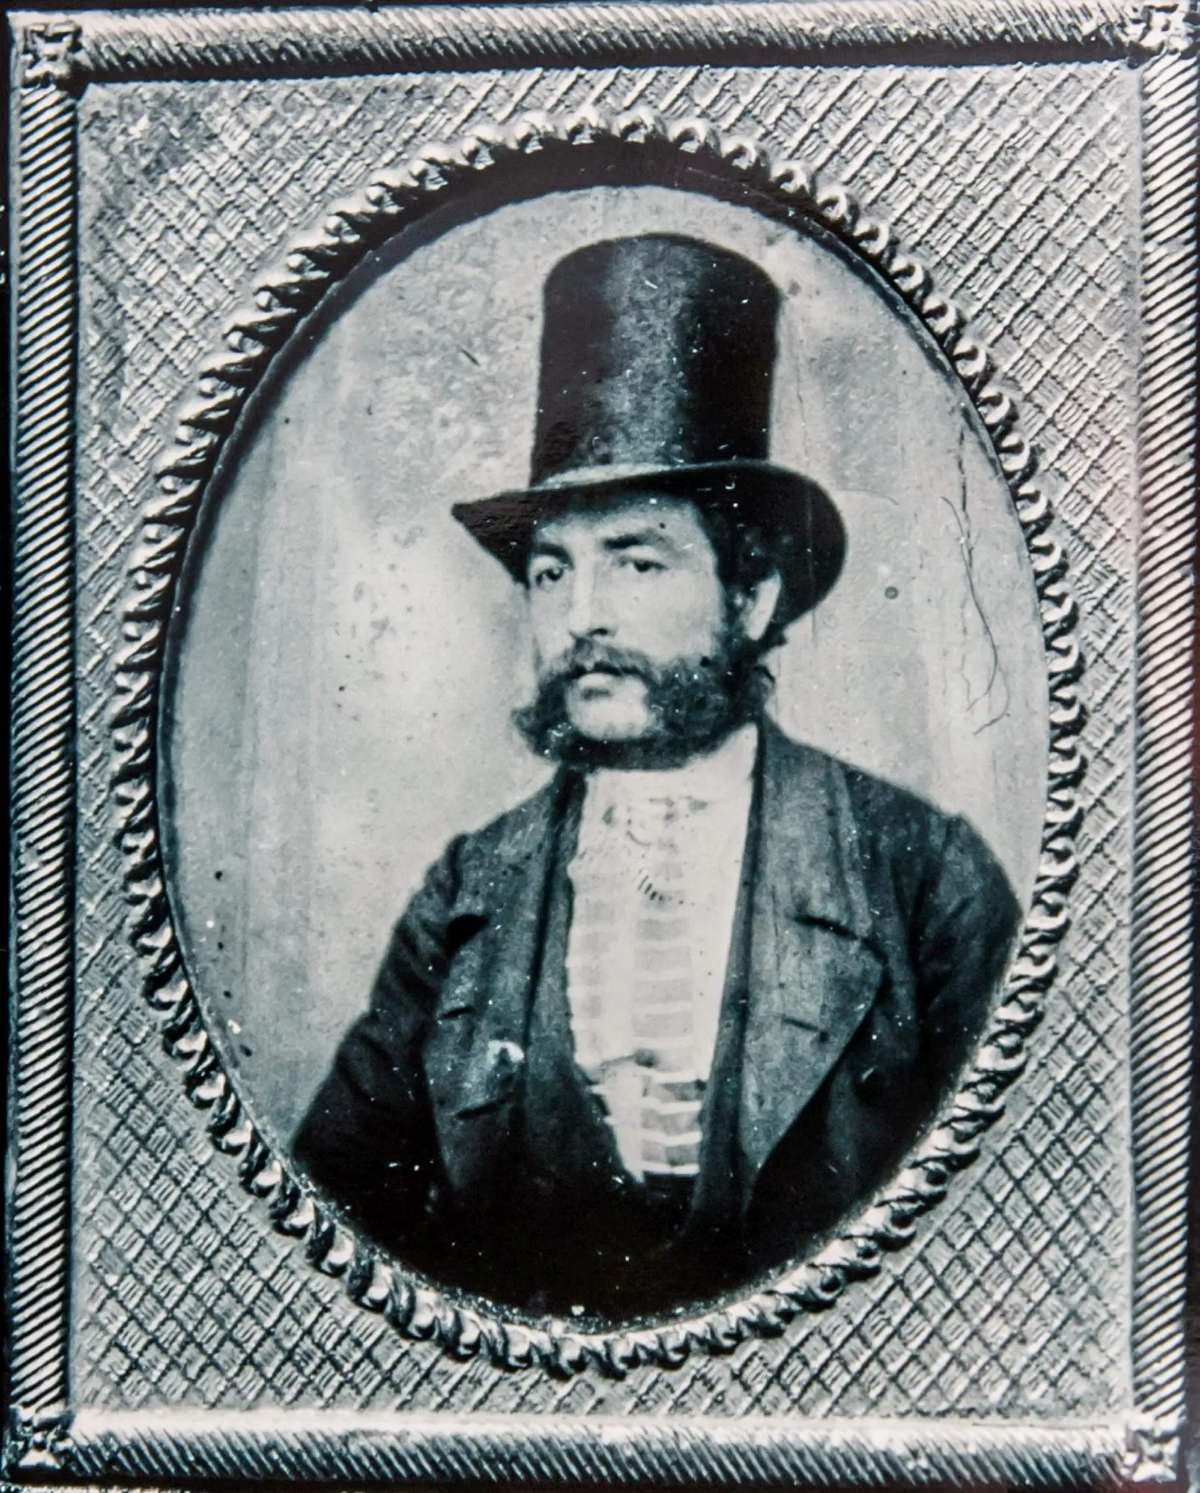 A mugshot of an unknown man in top hat.